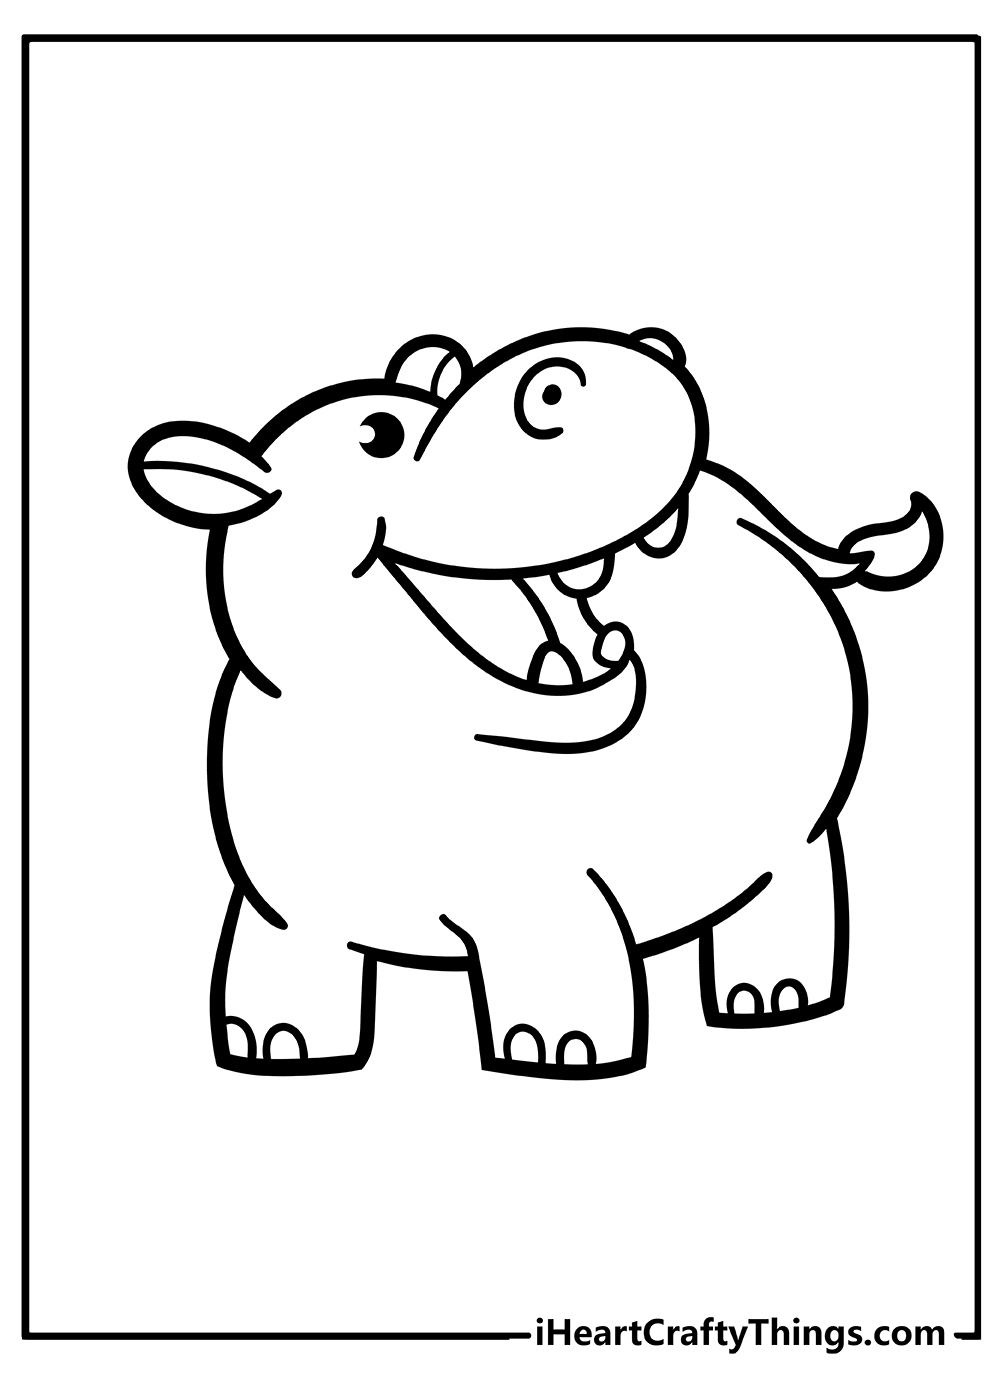 Hippo Coloring Pages for preschoolers free printable